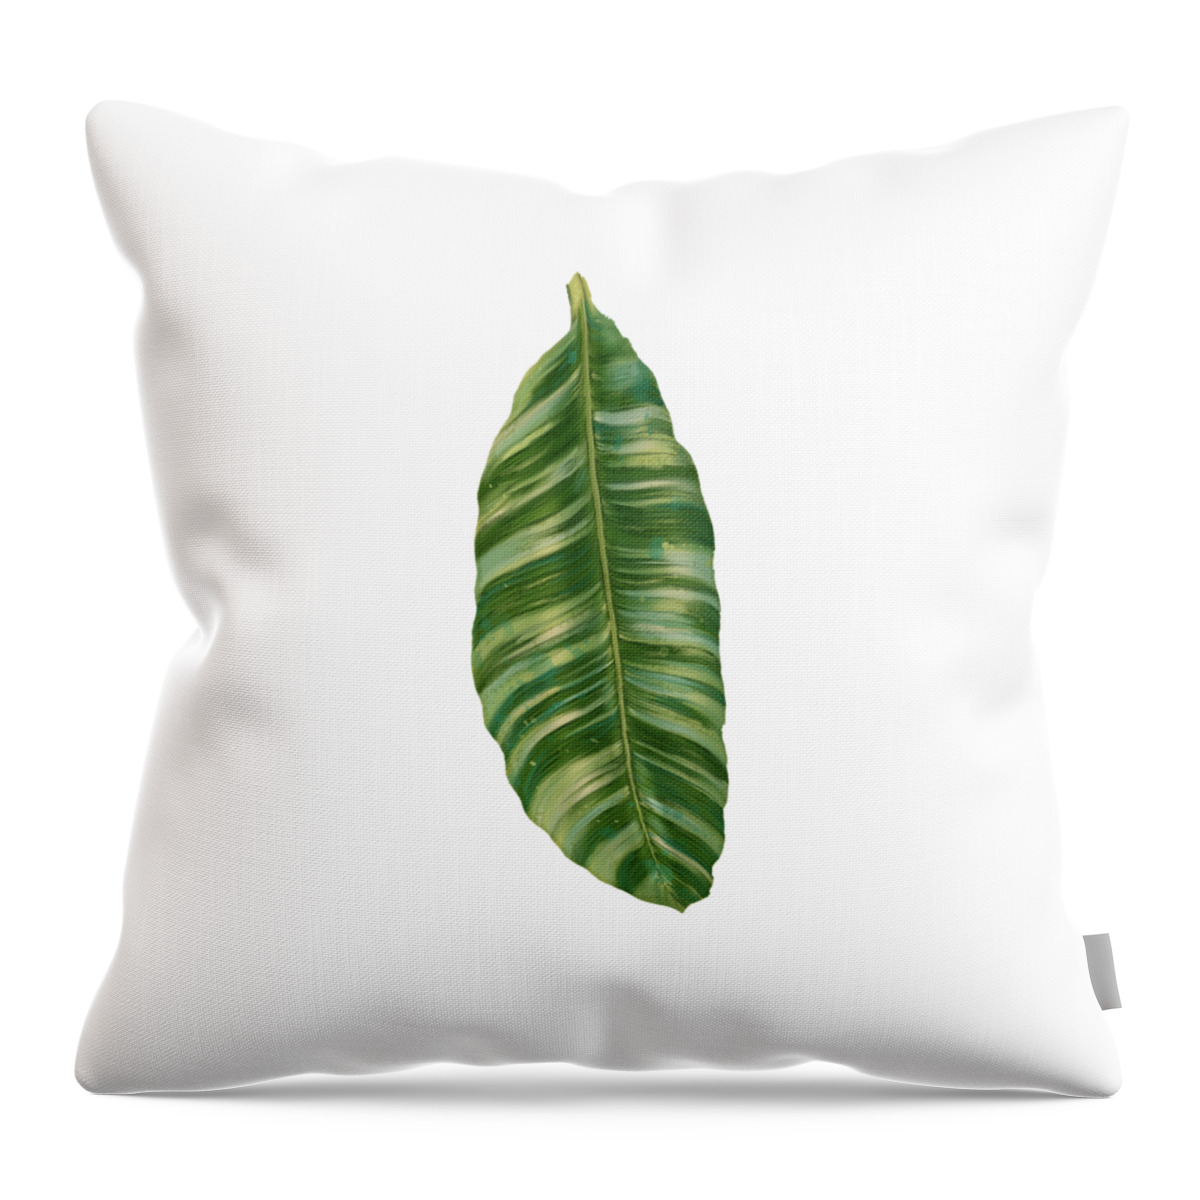 Tropical Throw Pillow featuring the painting Rainforest Resort - Tropical Banana Leaf by Audrey Jeanne Roberts